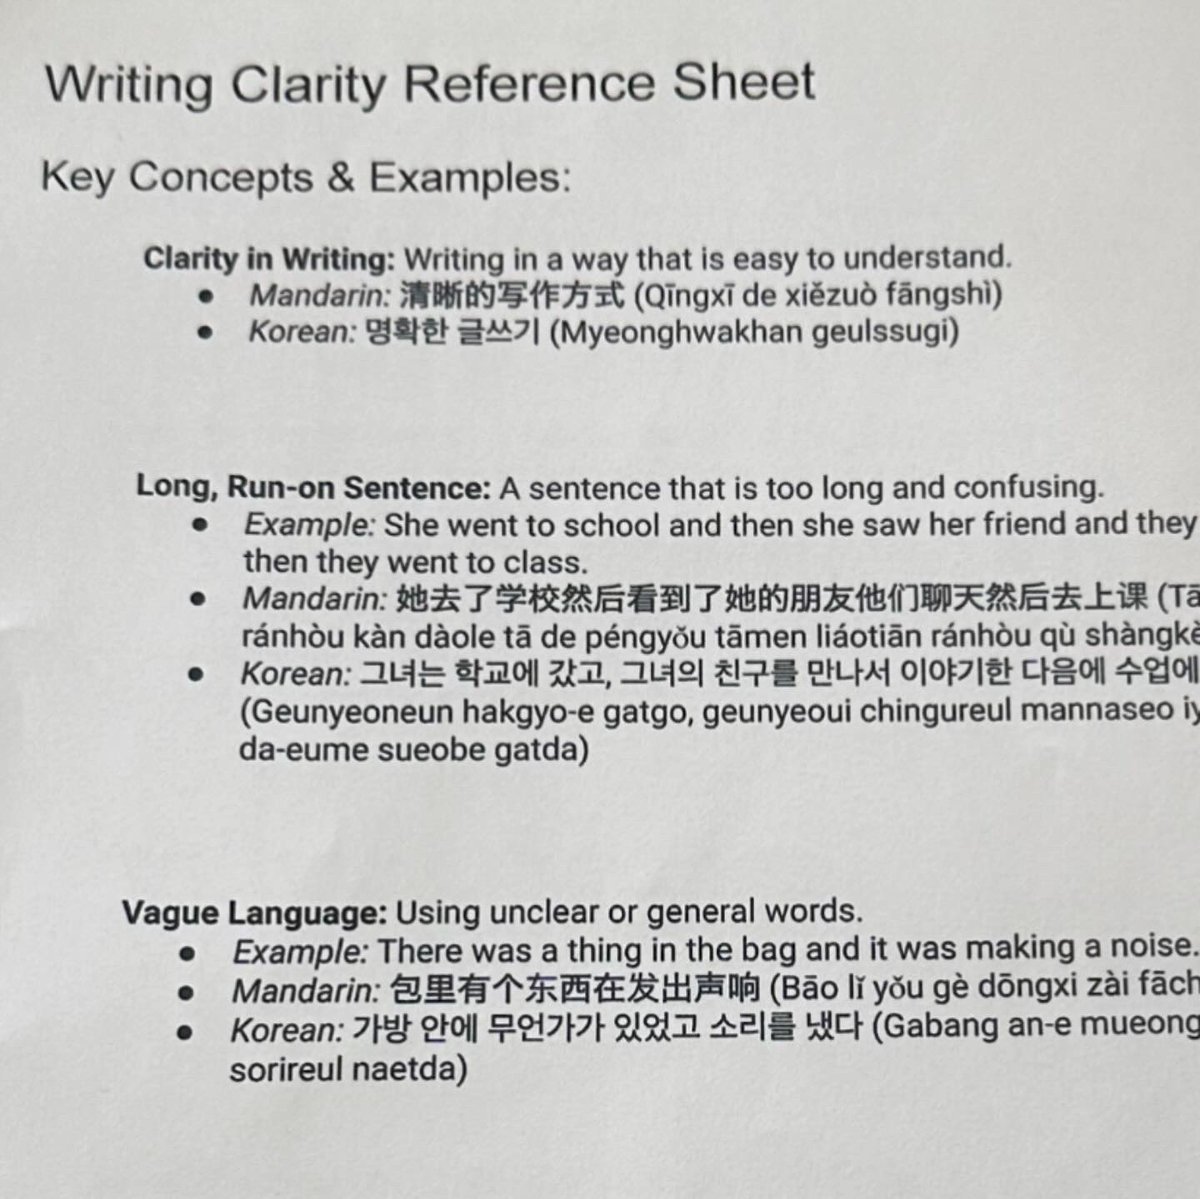 Working on clarity in our writing today with 7th grade EAL students. Used translanguaging, collaboration, and relation to home languages and cultures. This lesson was a total success! #EAL #translanguaging #learningisforeveryone